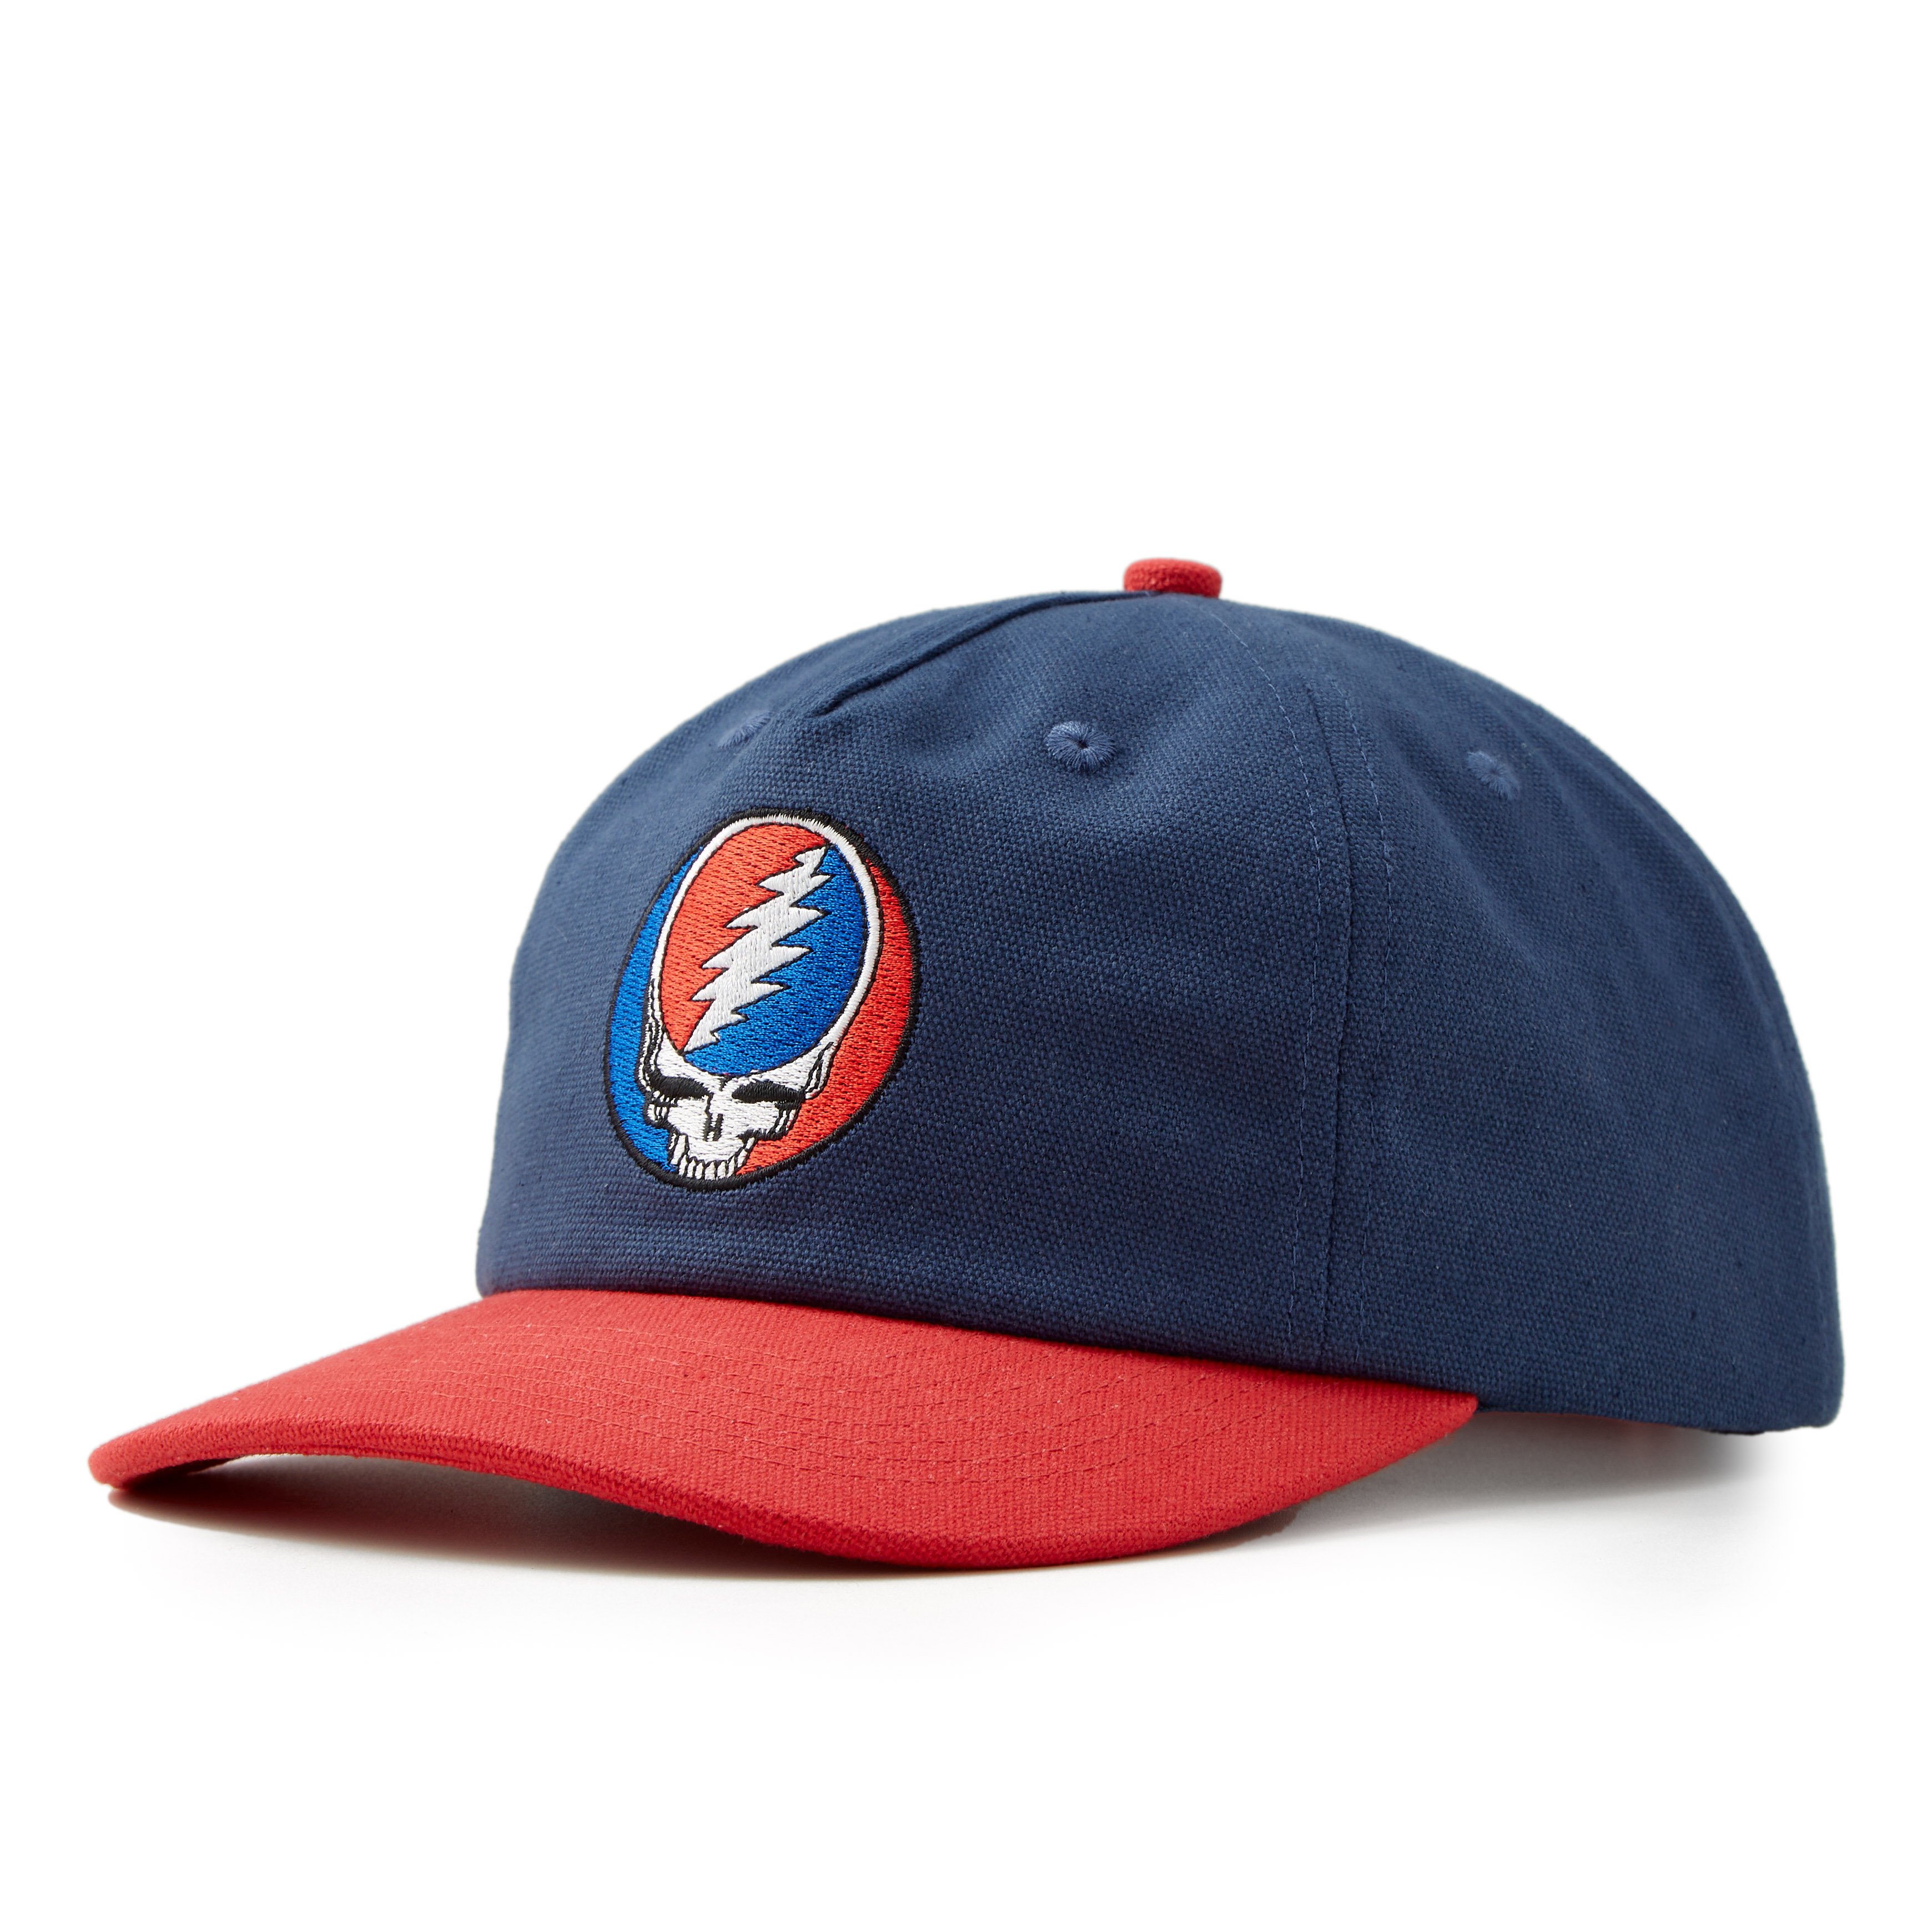 Huckberry x Grateful Dead Steal Your Face Canvas Snapback - Red